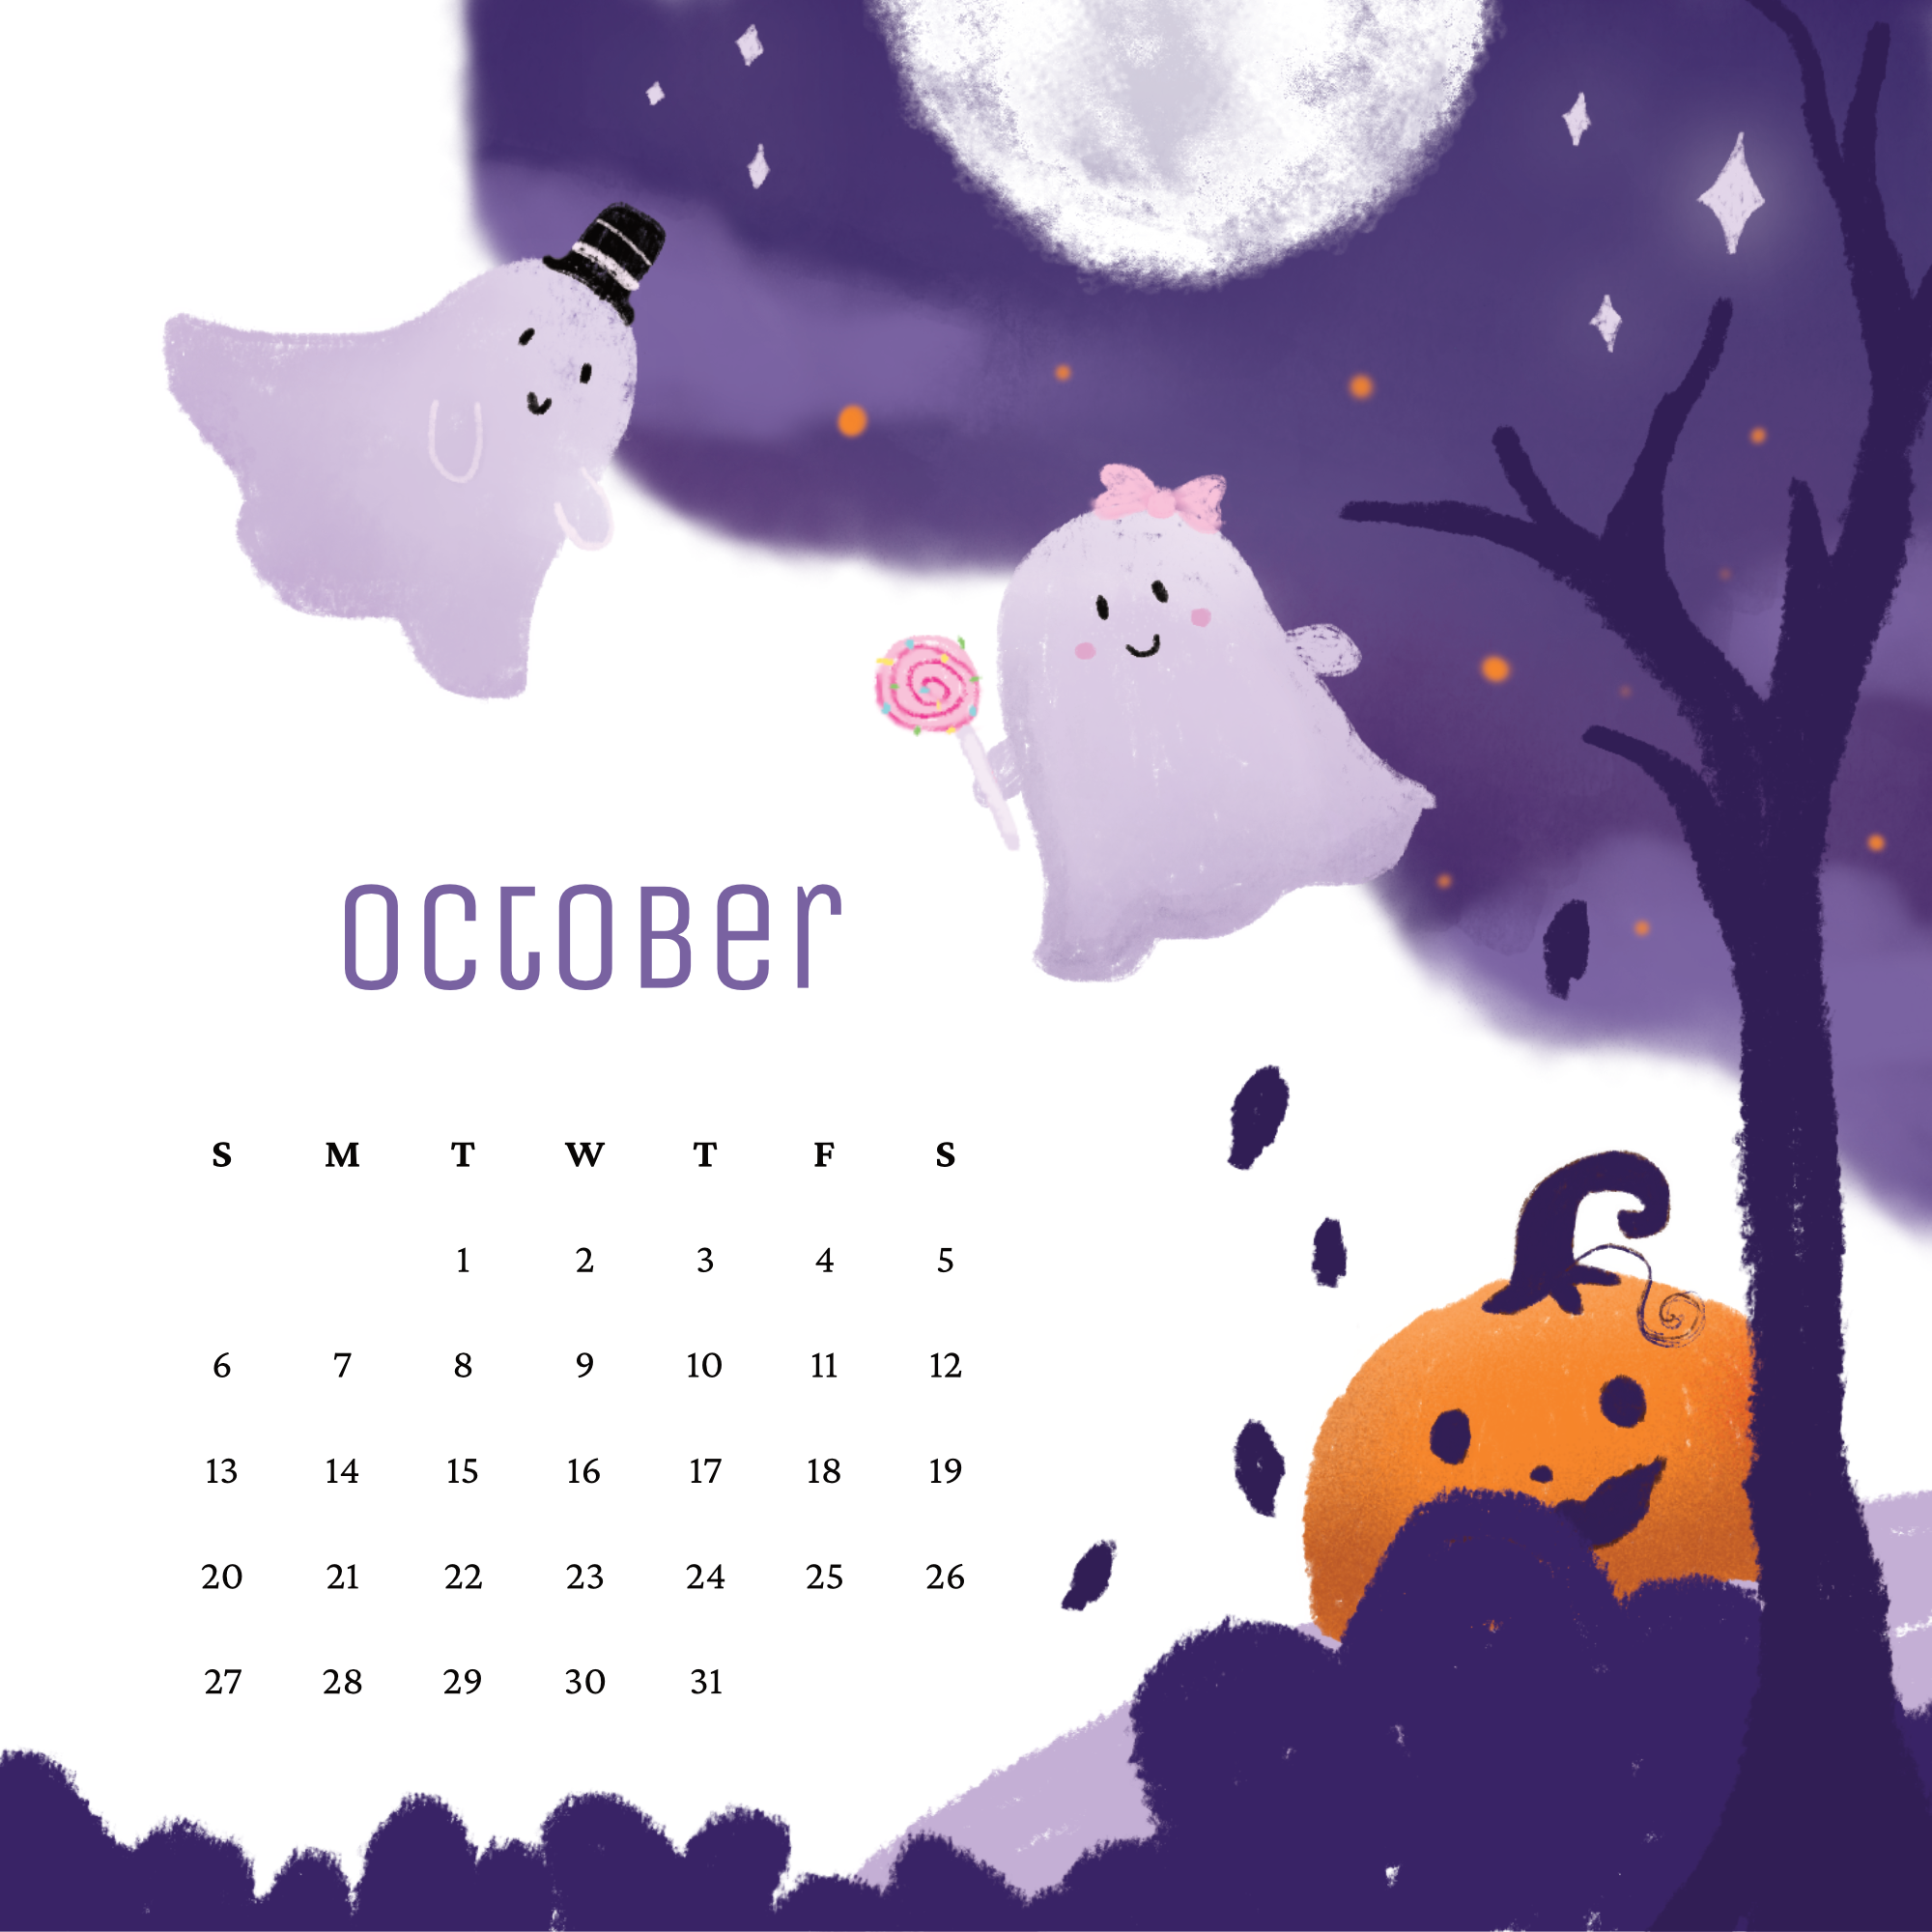 Halloween theme illustration of a calendar for the month of October.